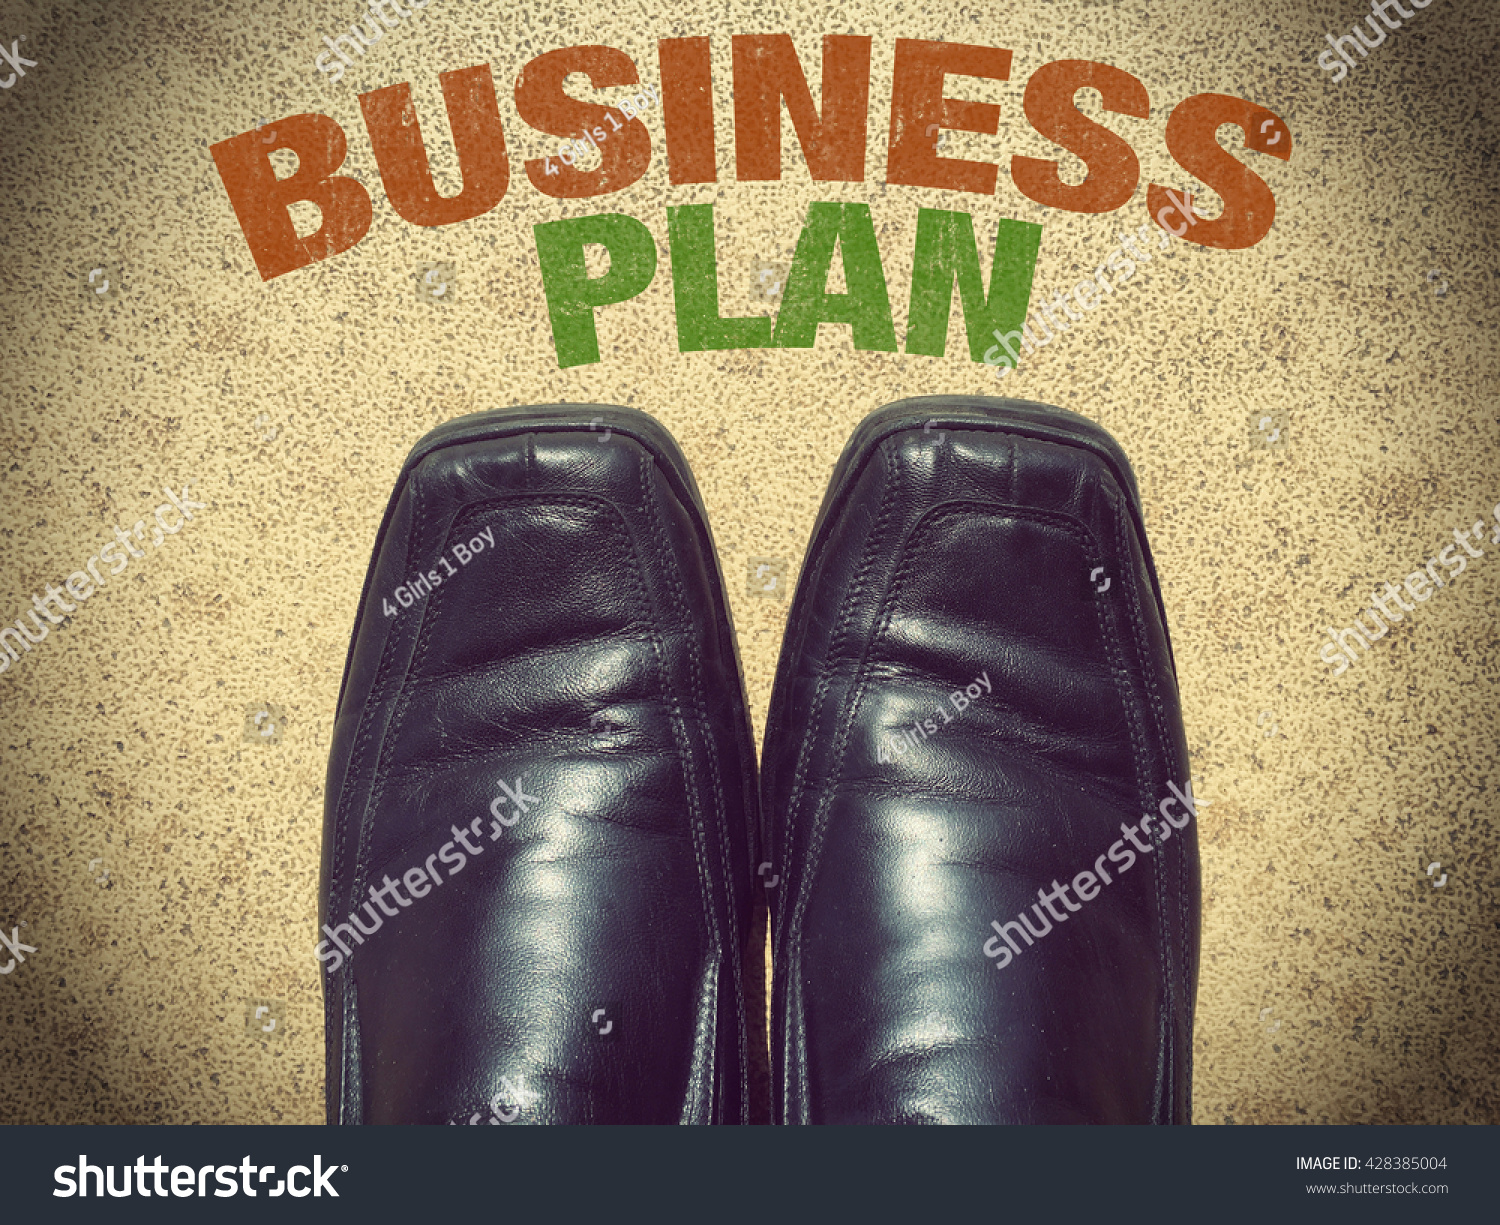 slippers business plan